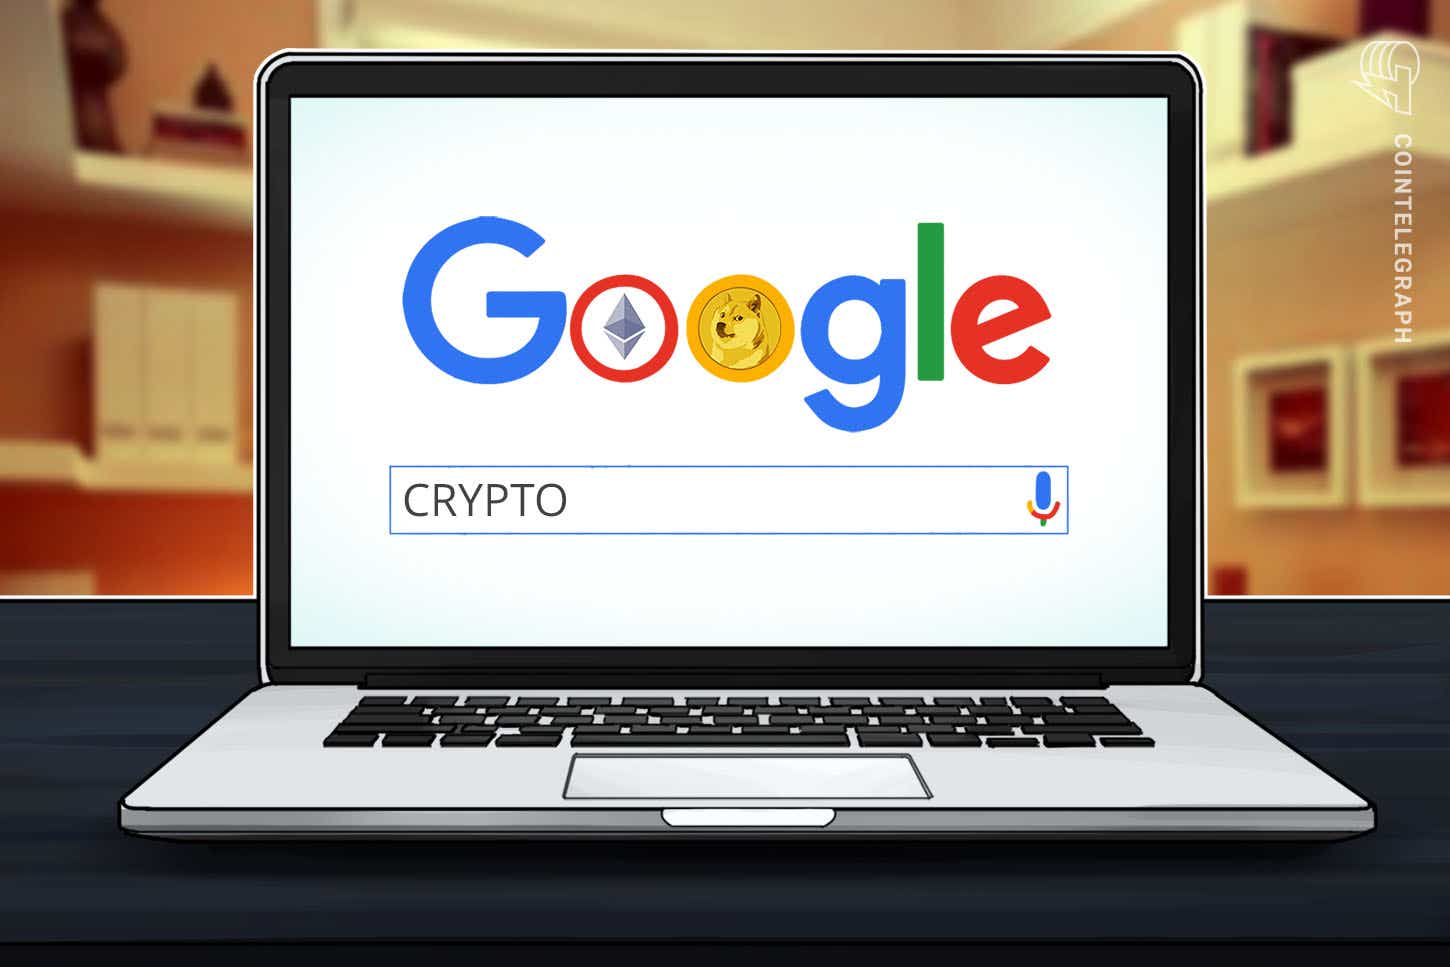 Dogecoin-and-ether-rank-in-top-10-news-searches-on-google-in-2021